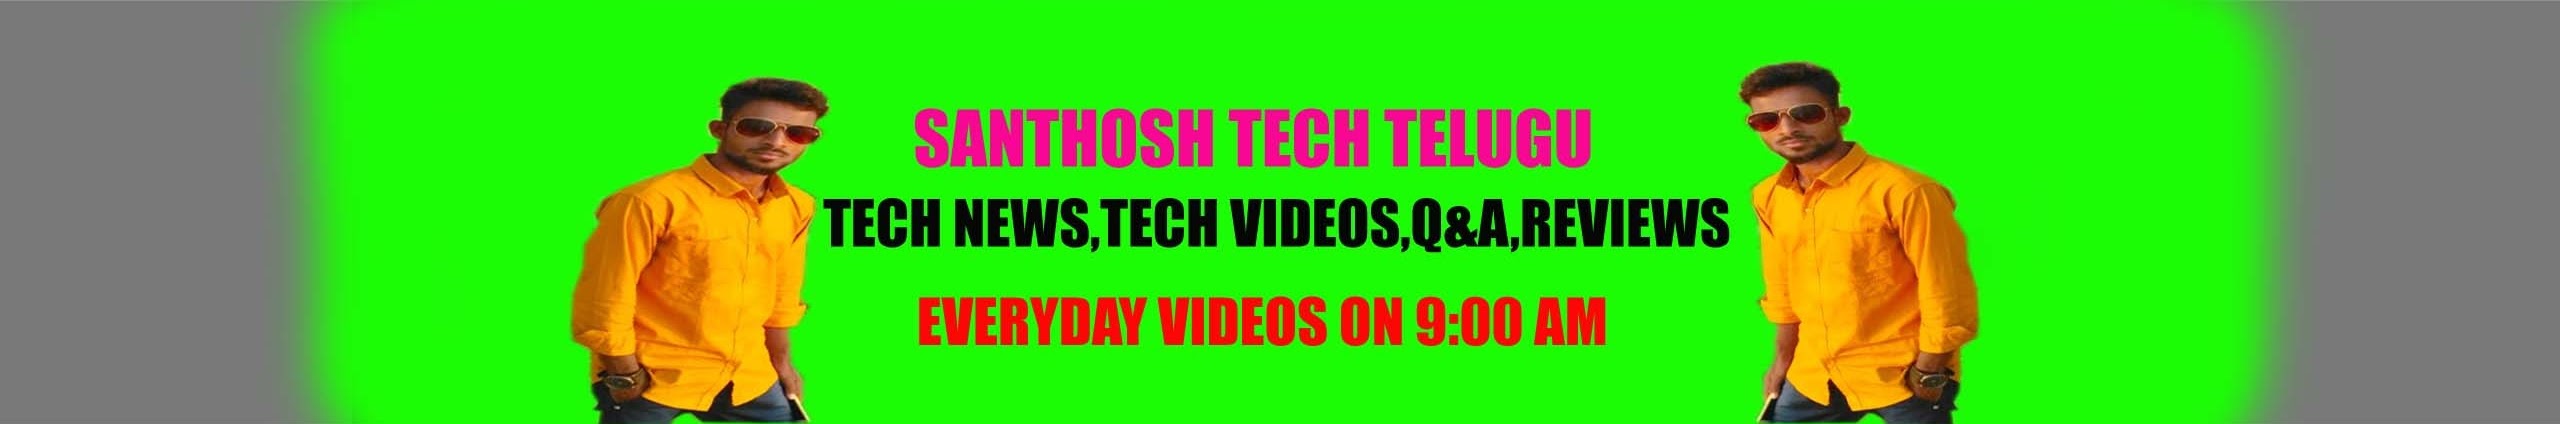 Santhosh Tech Telugu Youtube Channel Analytics And Report Powered By Noxinfluencer Mobile